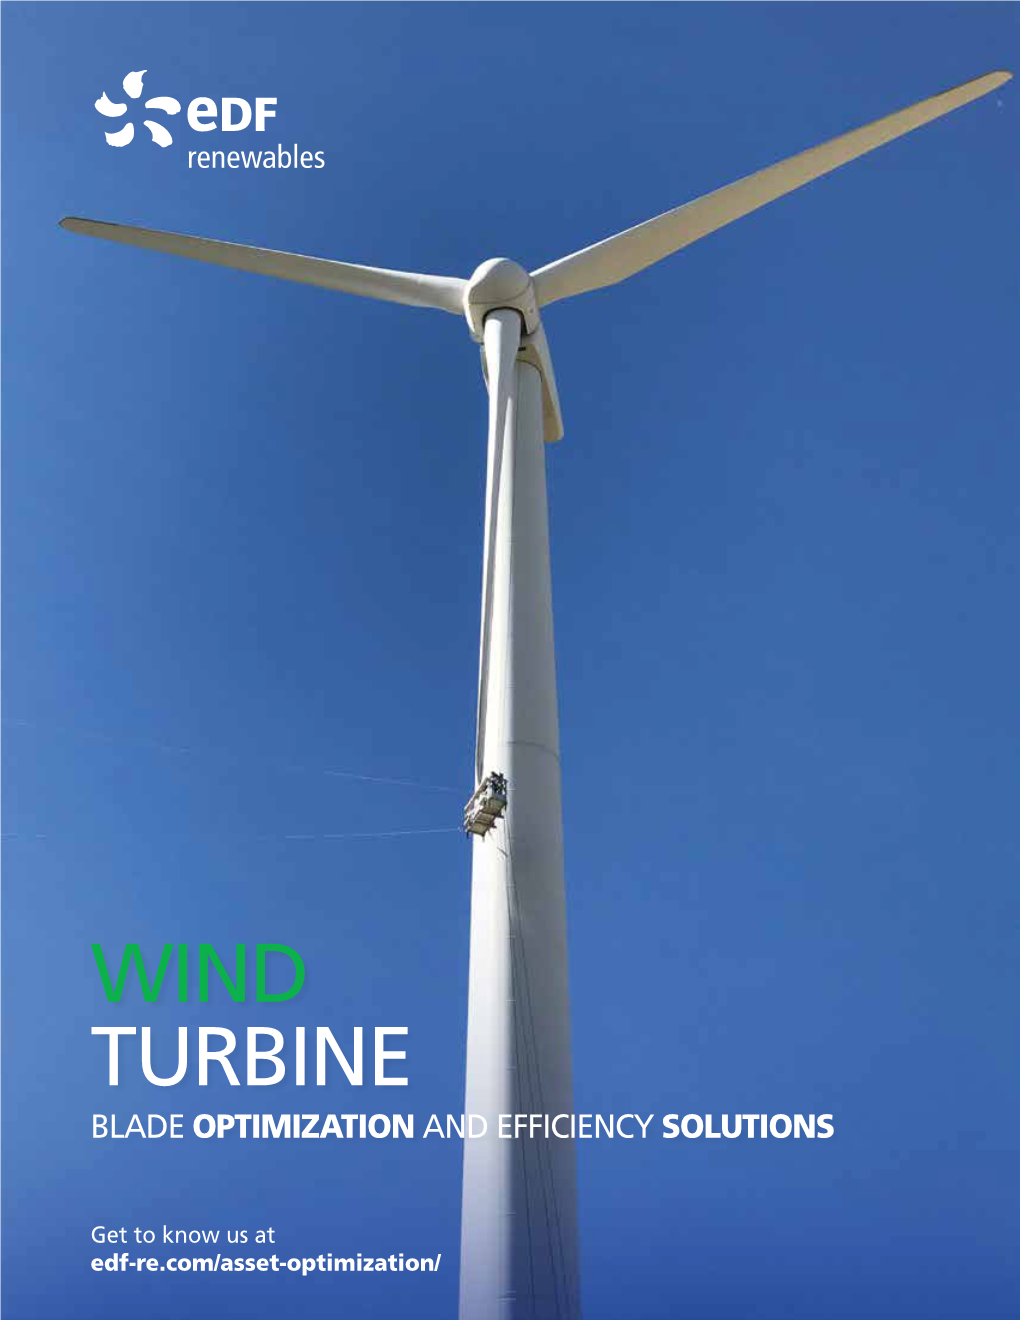 Turbine Blade Optimization and Efficiency Solutions